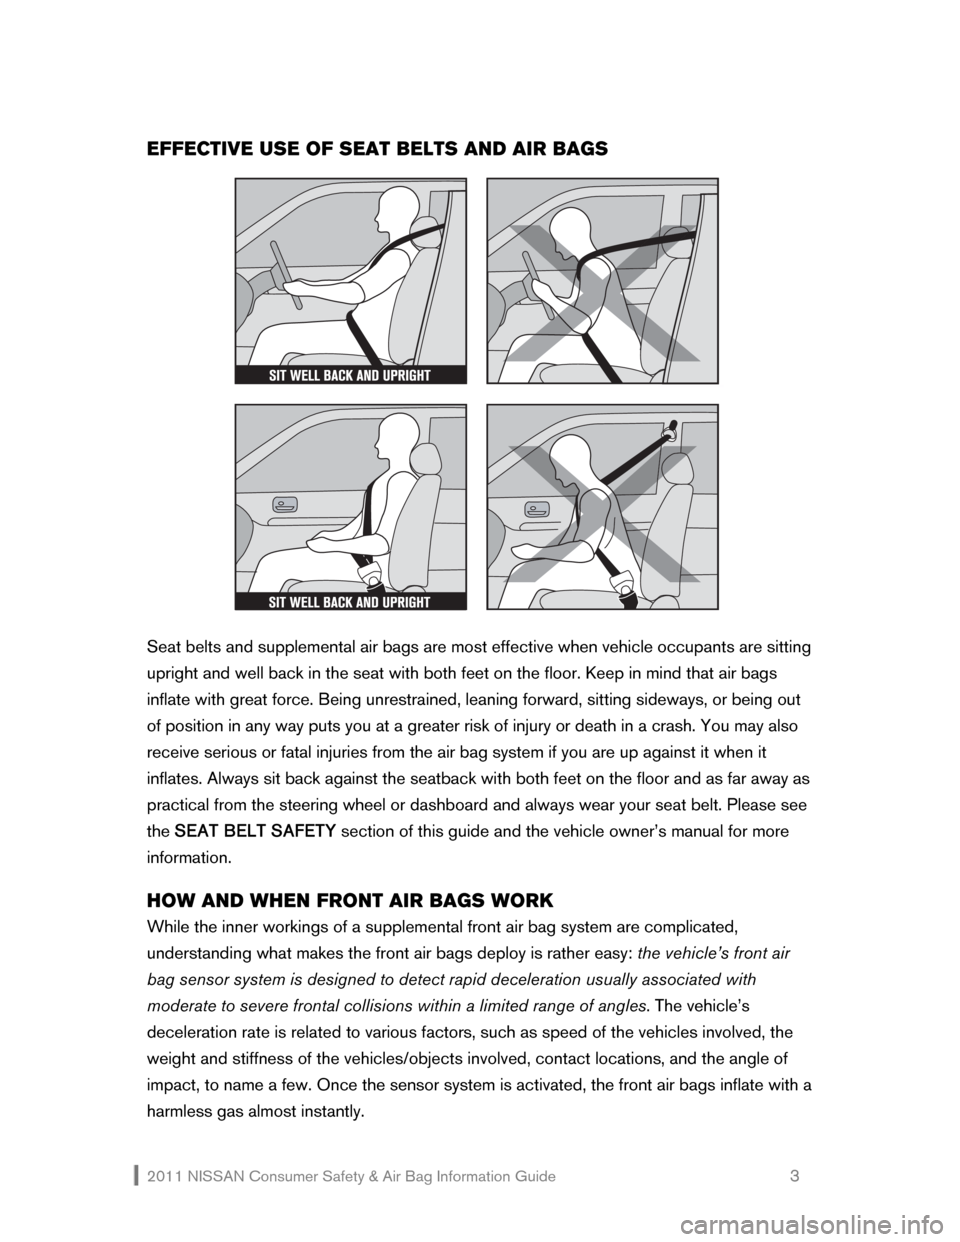 NISSAN CUBE 2011 3.G Consumer Safety Air Bag Information Guide 2011 NISSAN Consumer Safety & Air Bag Information Guide                                                       3 
EFFECTIVE USE OF SEAT BELTS AND AIR BAGS 
 
 
 
Seat belts and supplemental air bags ar